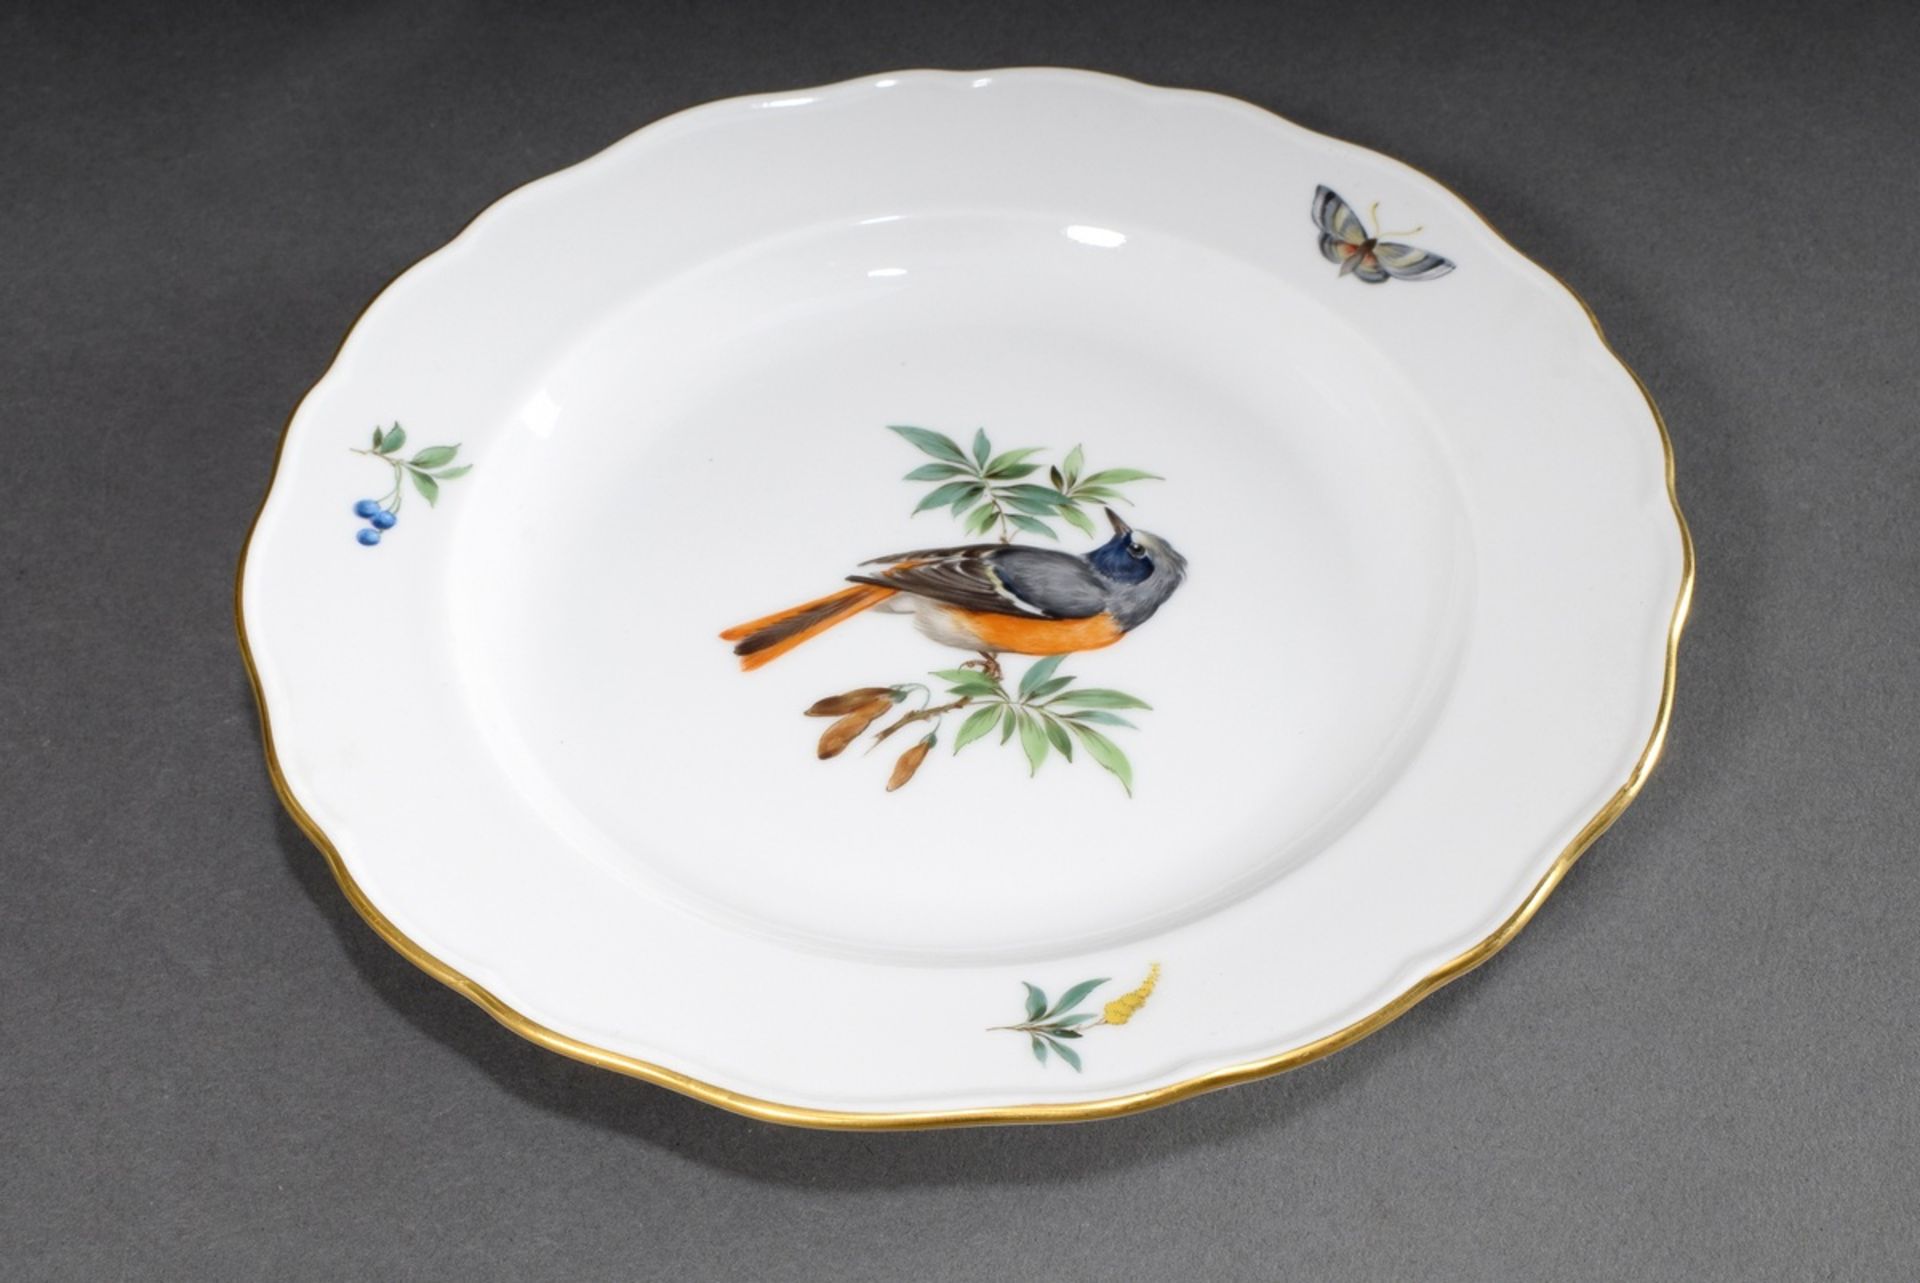 Meissen plate with polychrome "Bird Painting with Insects" (Redstart), new cut-out, gold rim, Ø 20, - Image 3 of 4